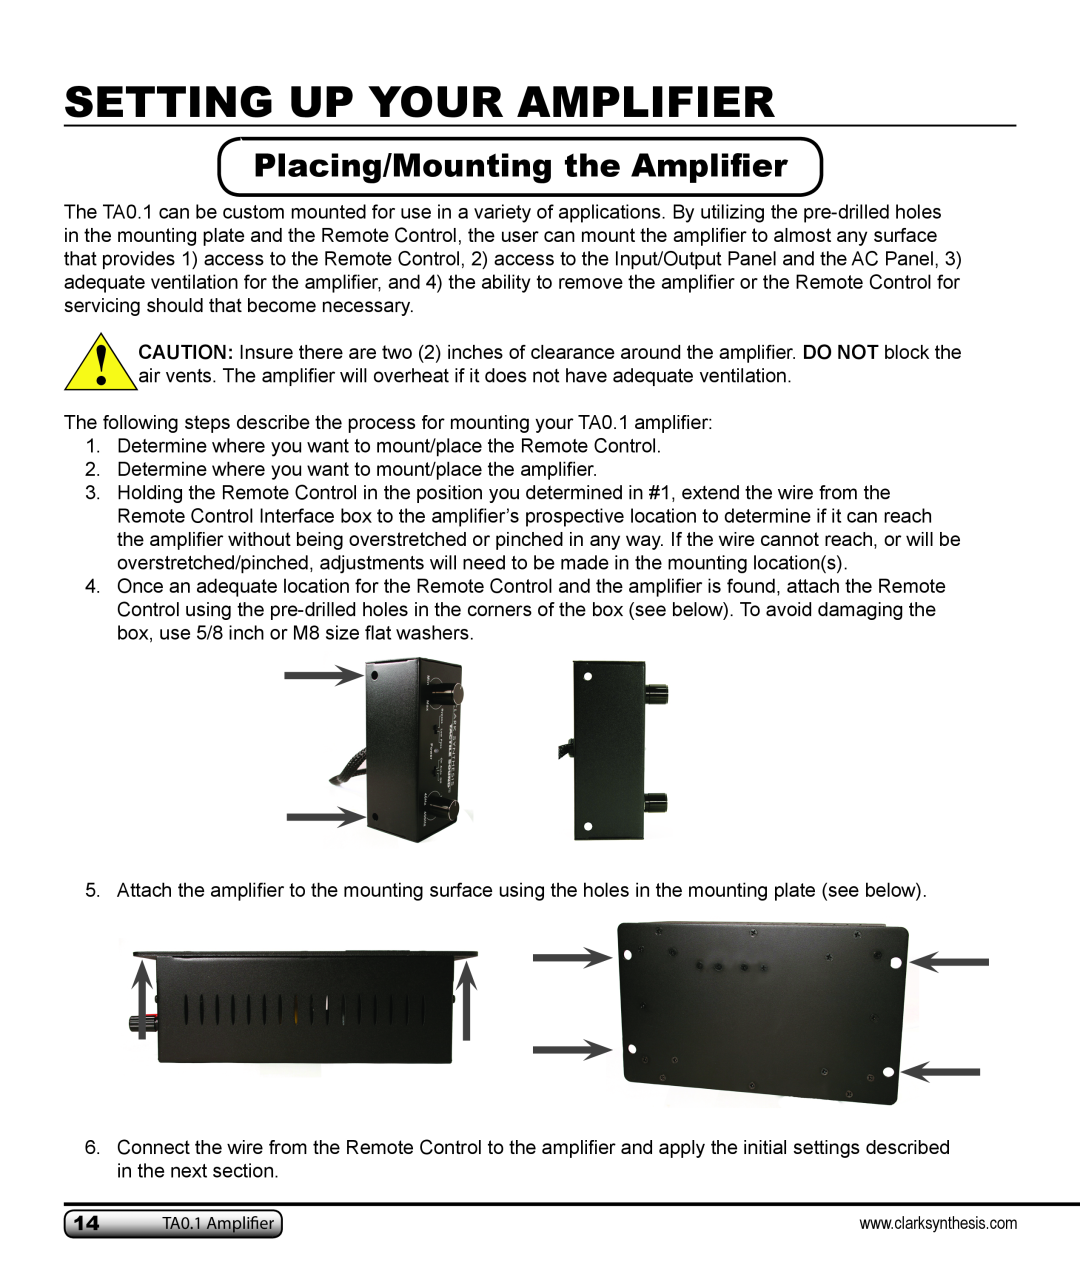 Clark Synthesis TA0.1 owner manual Placing/Mounting the Amplifier, Setting Up Your Amplifier 